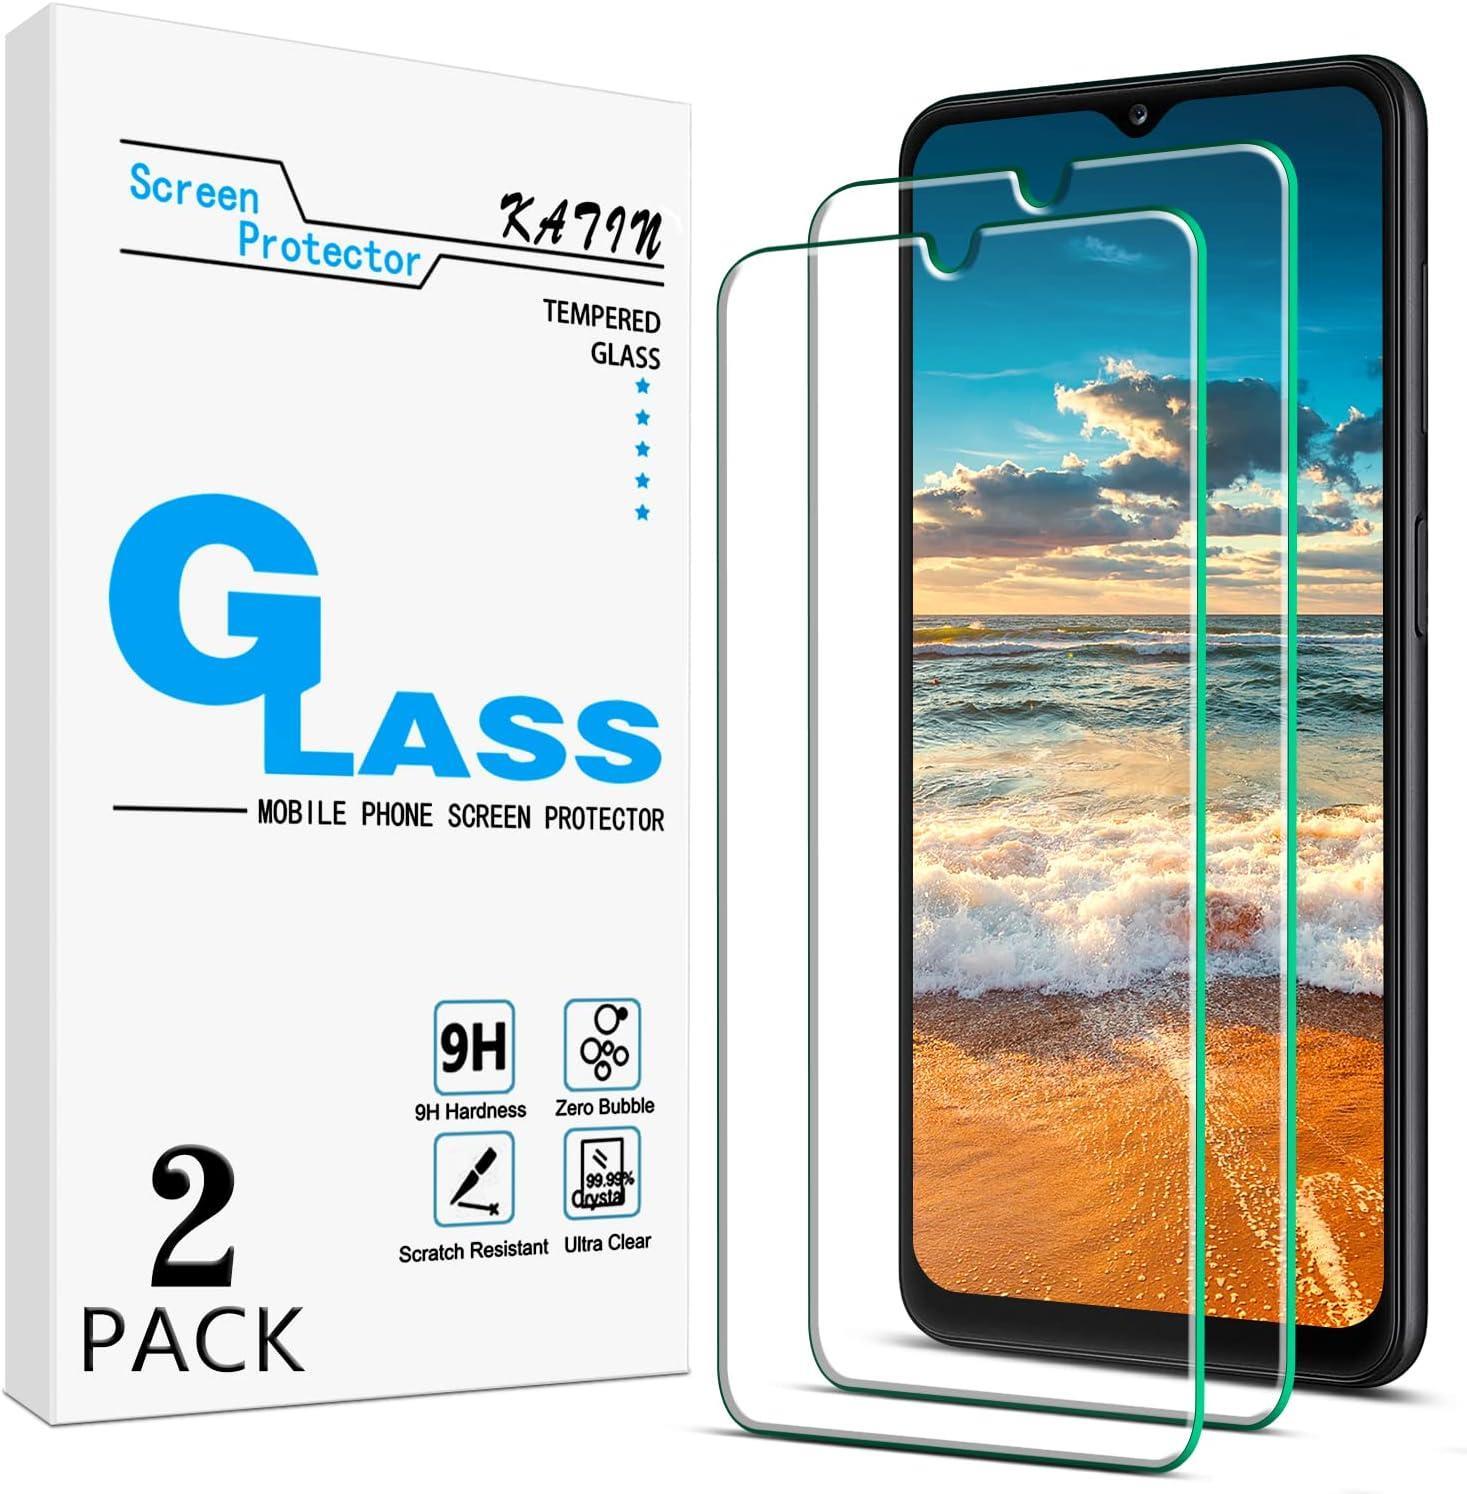 2 PACK 9H Tempered Glass Screen Protector for Nokia G20